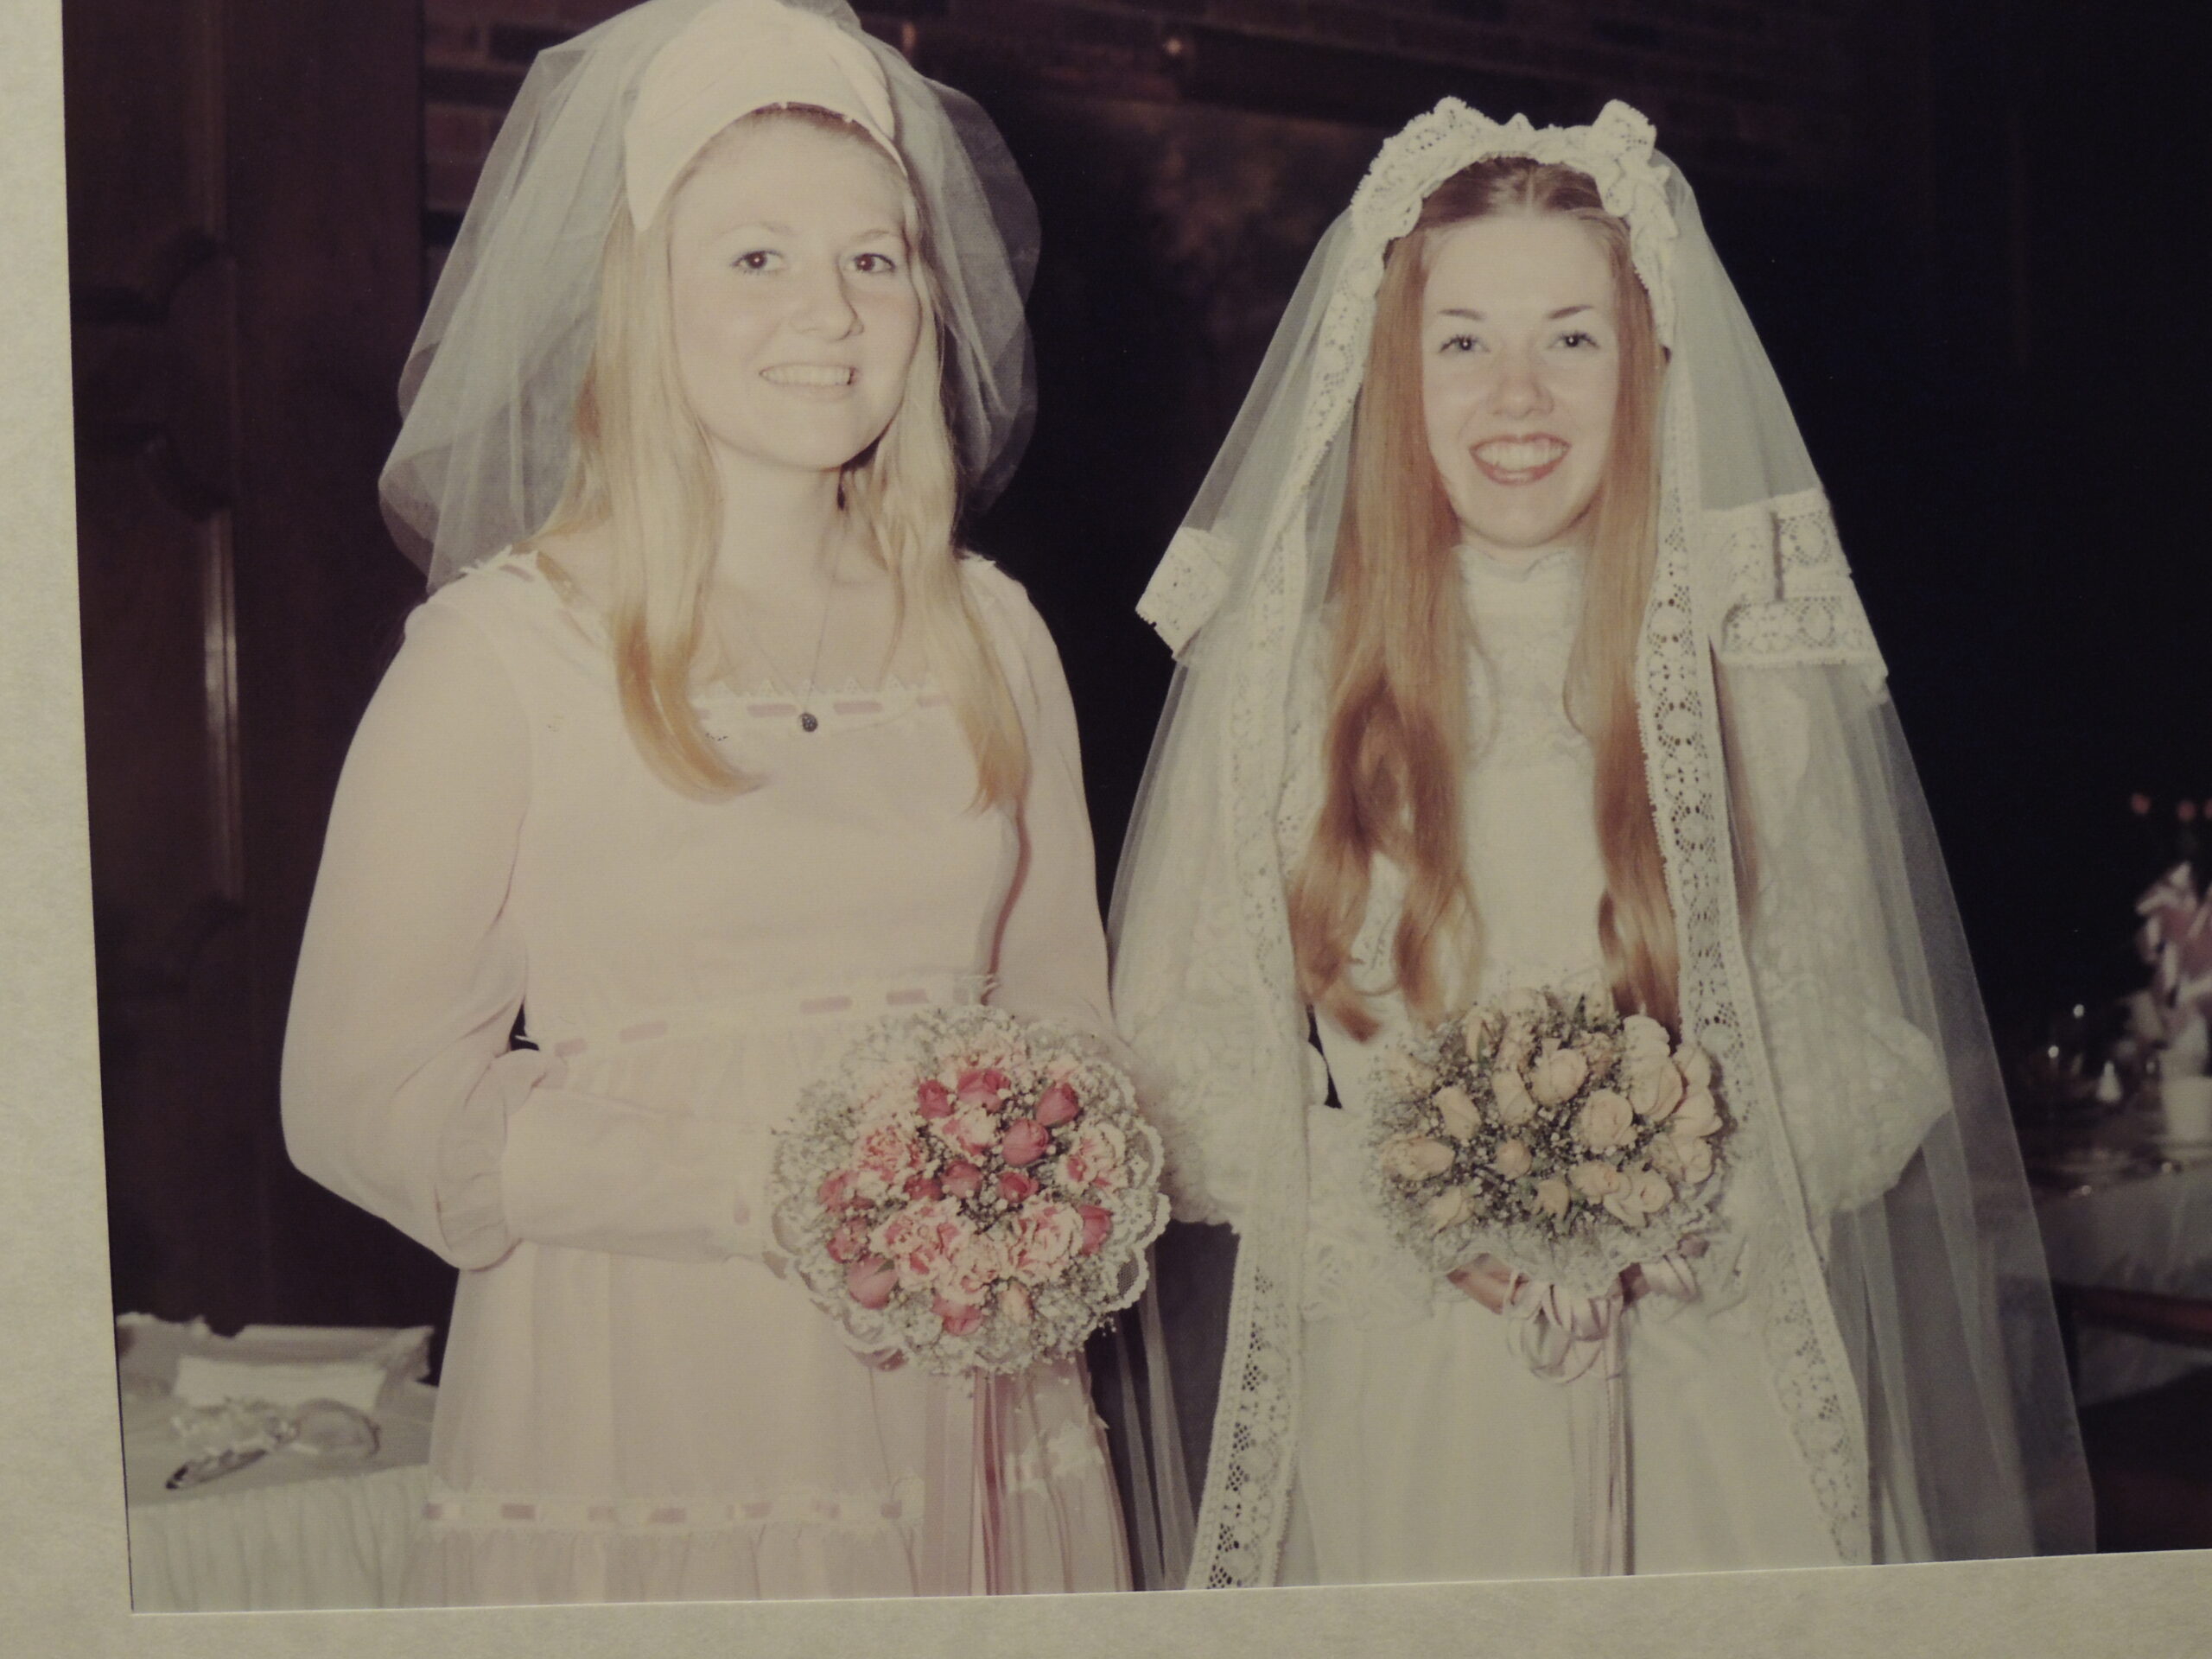 two girls dressed in wedding attire standing next to each other